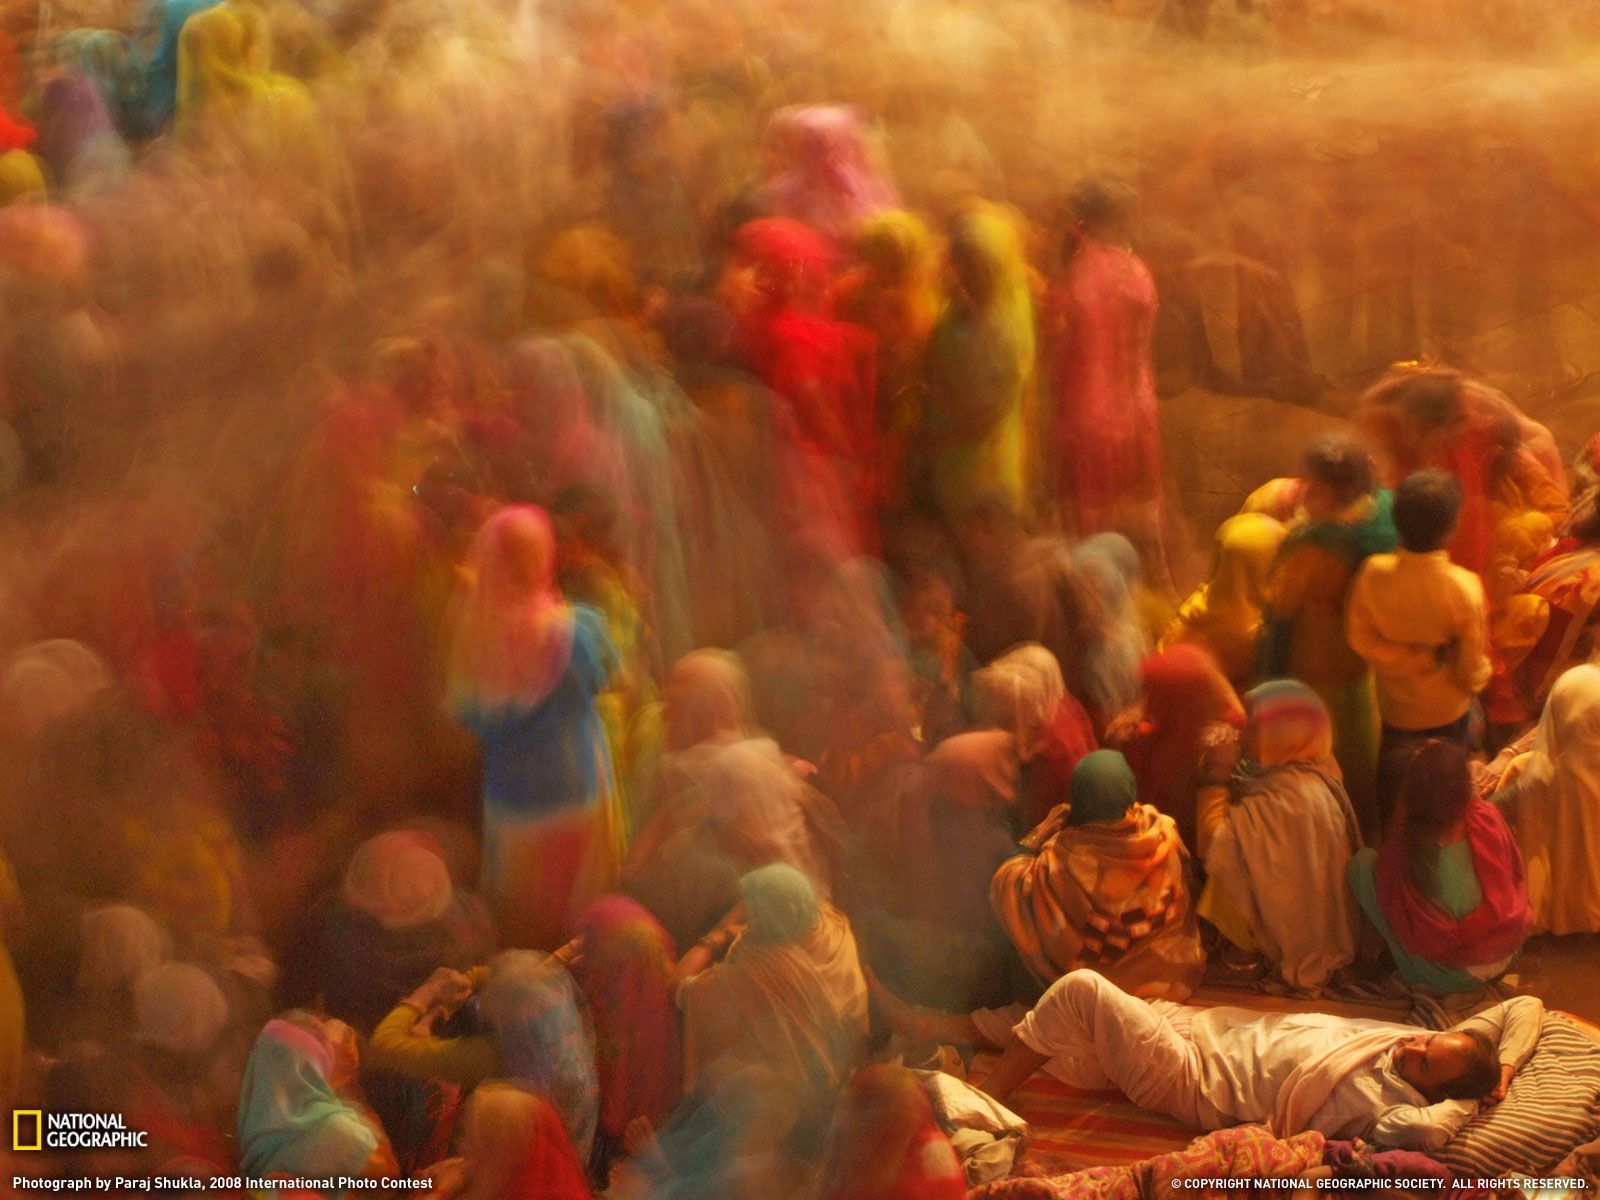 Commotion Picture, India Wallpaper - National Geographic Photo of